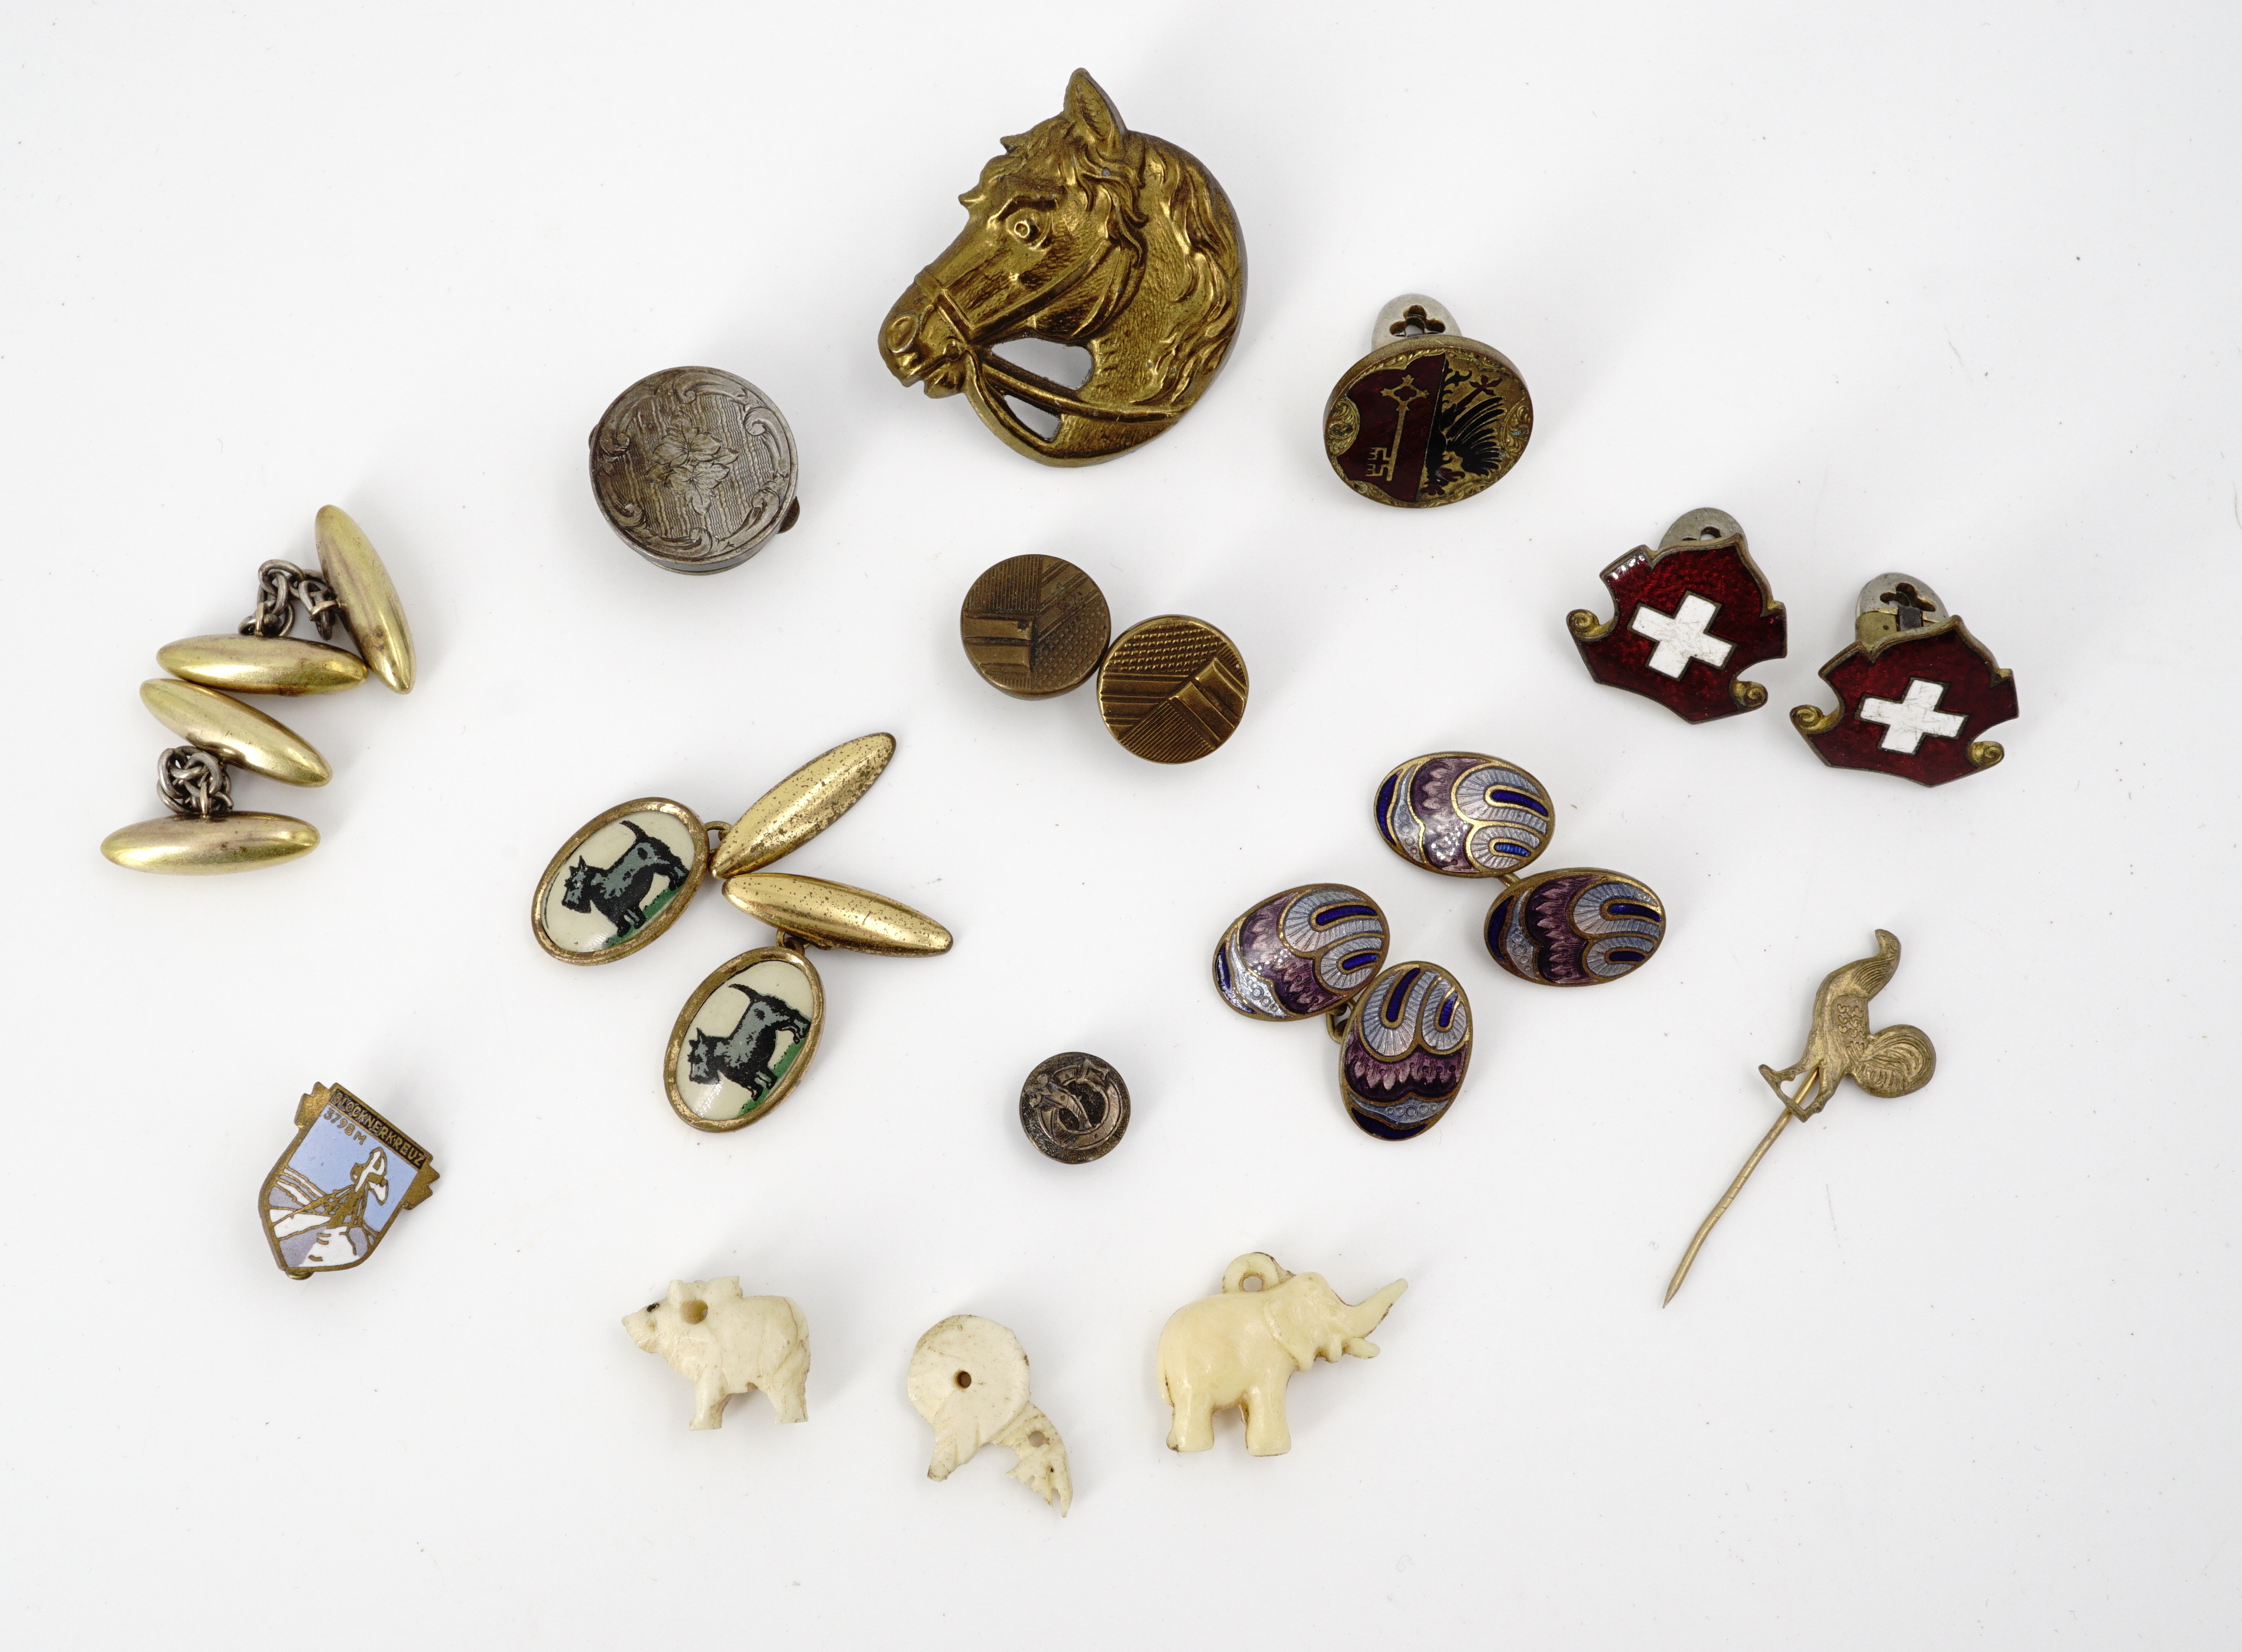 A quantity of antique and vintage cuff links and shirt studs, including basse-taille enamelled